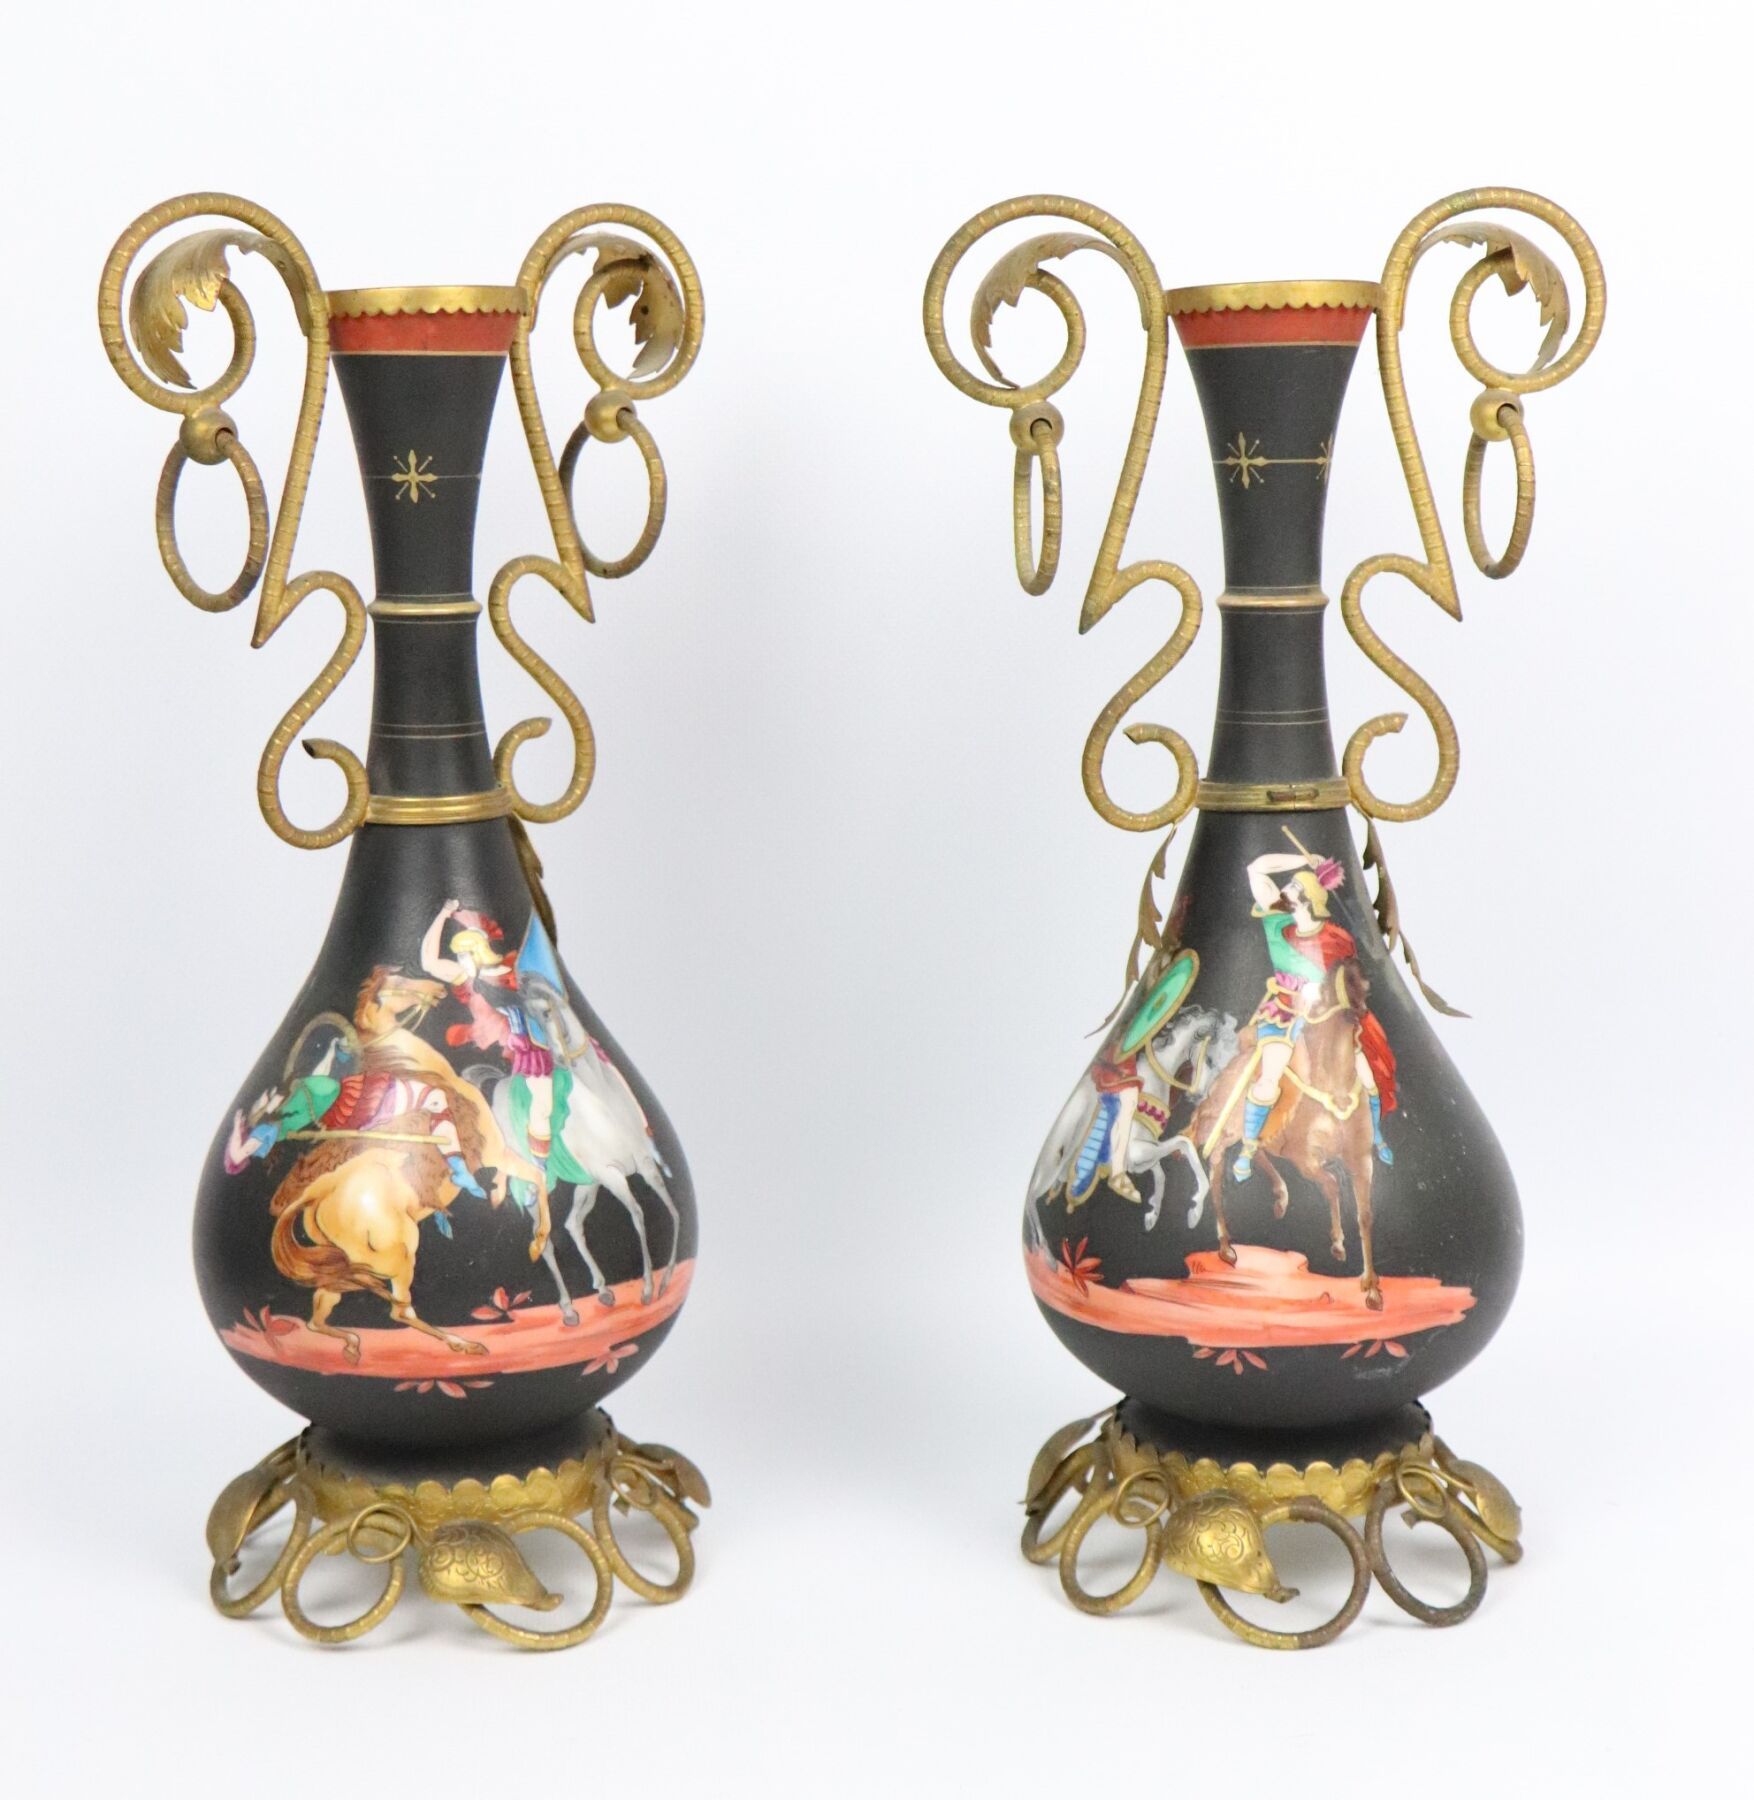 Null PARIS.
Pair of black-bottomed baluster-shaped porcelain vases with polychro&hellip;